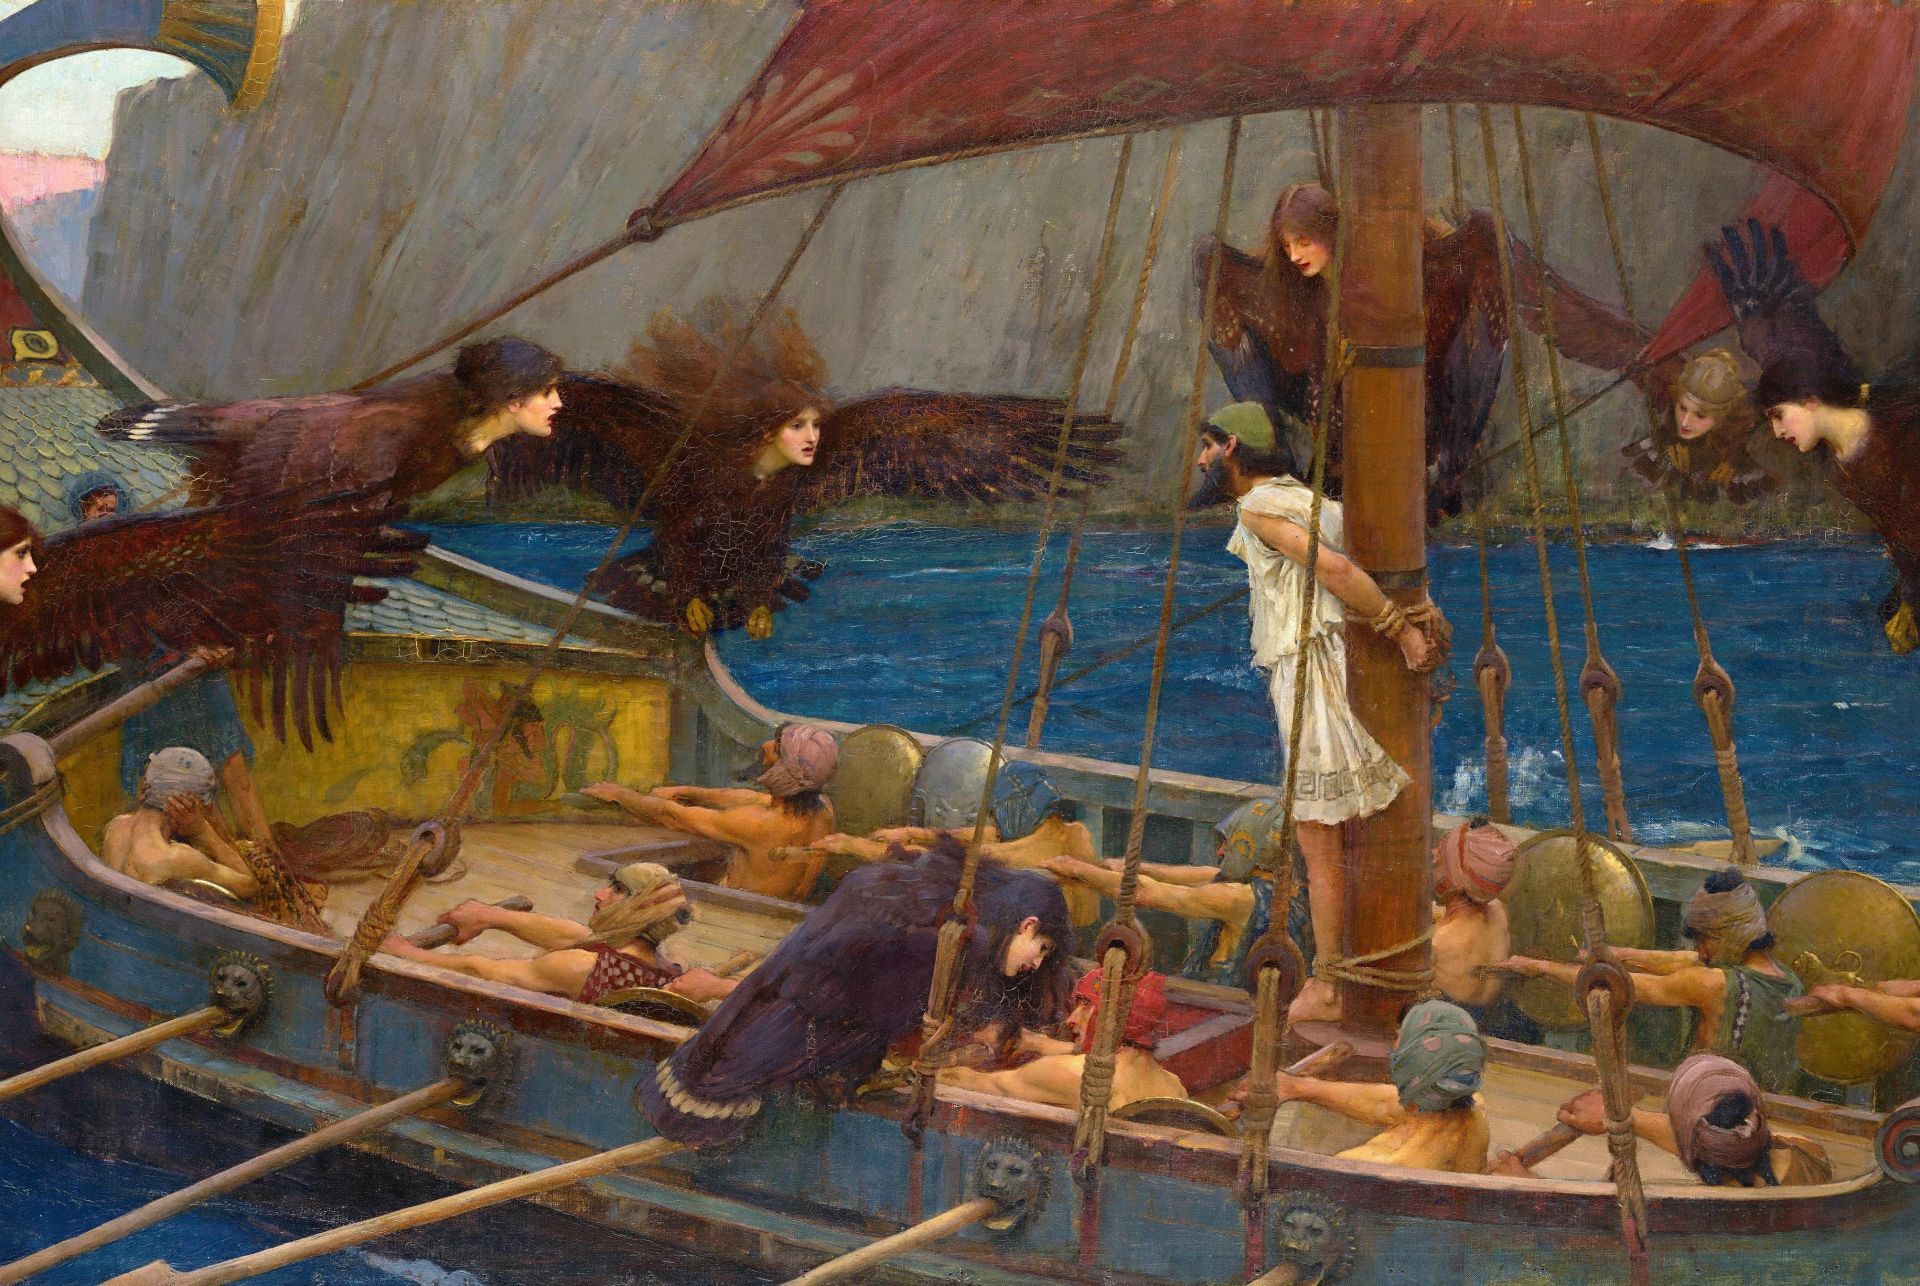 odysseus' journey before he came home from ithaca